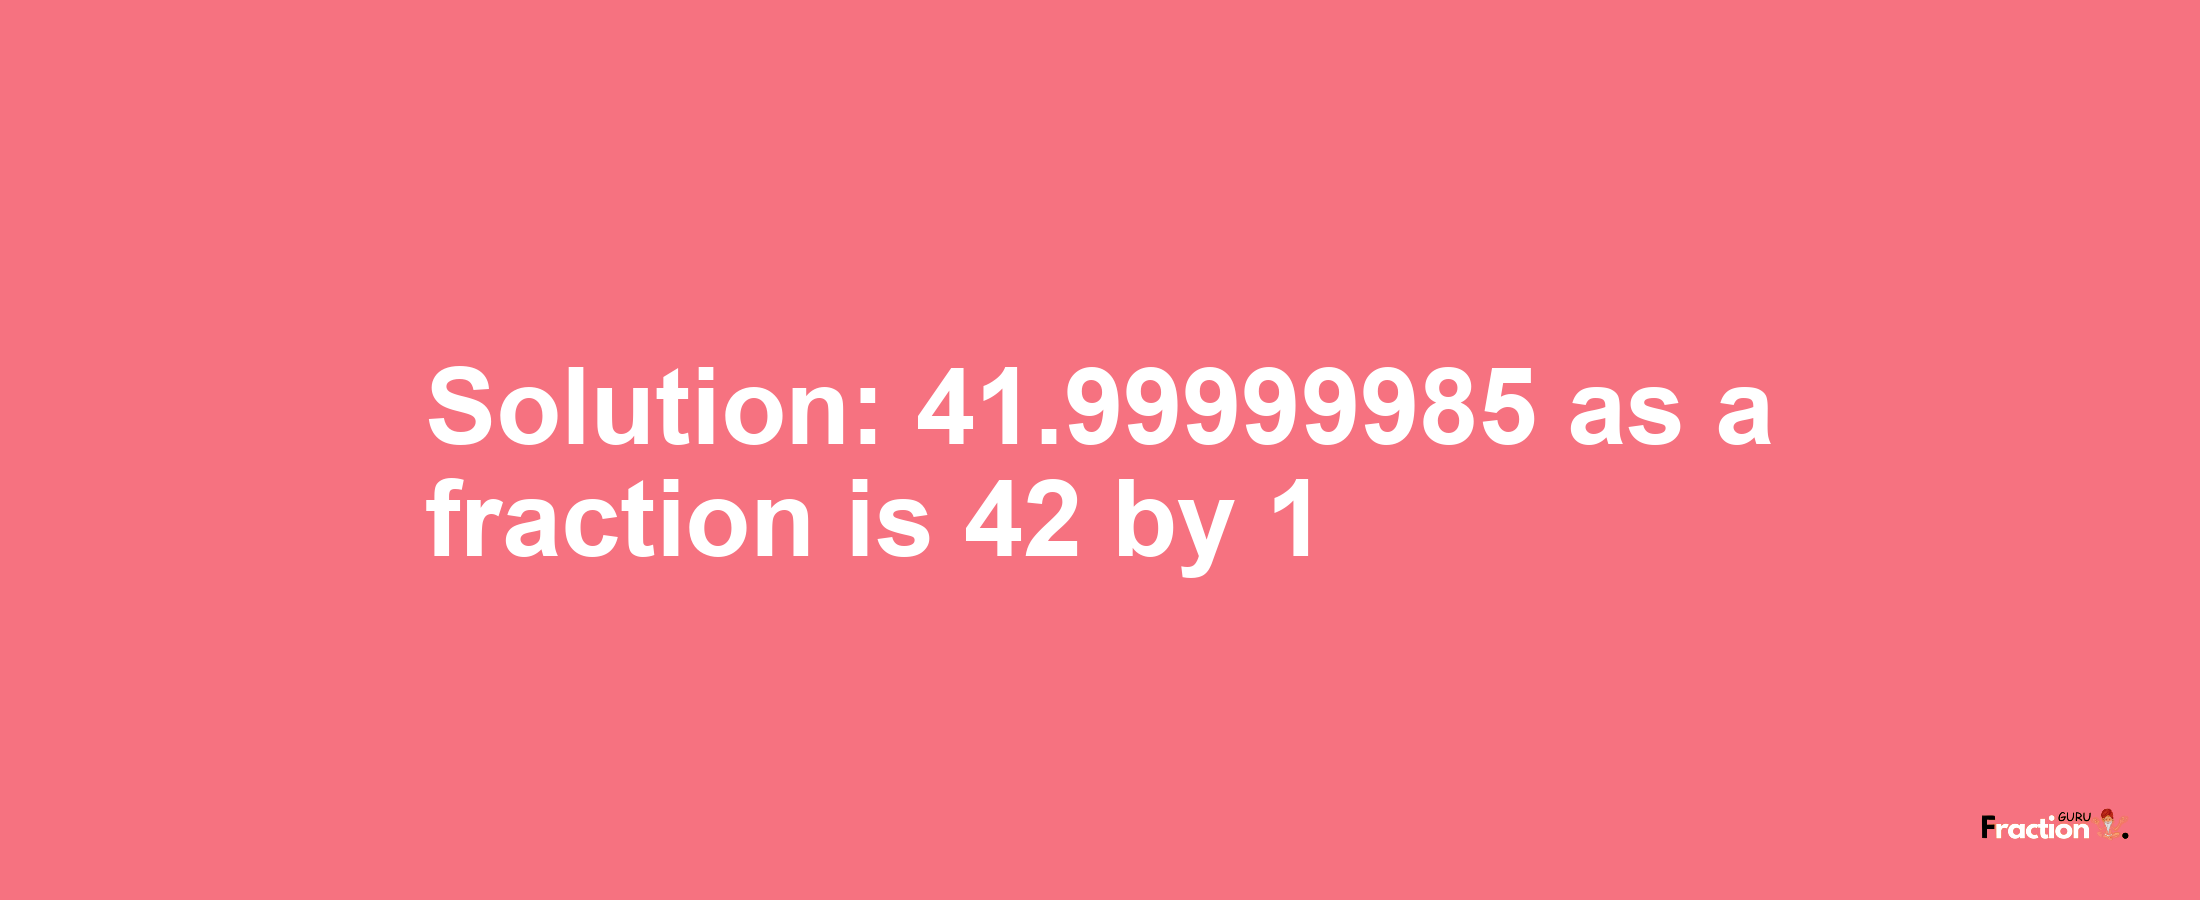 Solution:41.99999985 as a fraction is 42/1